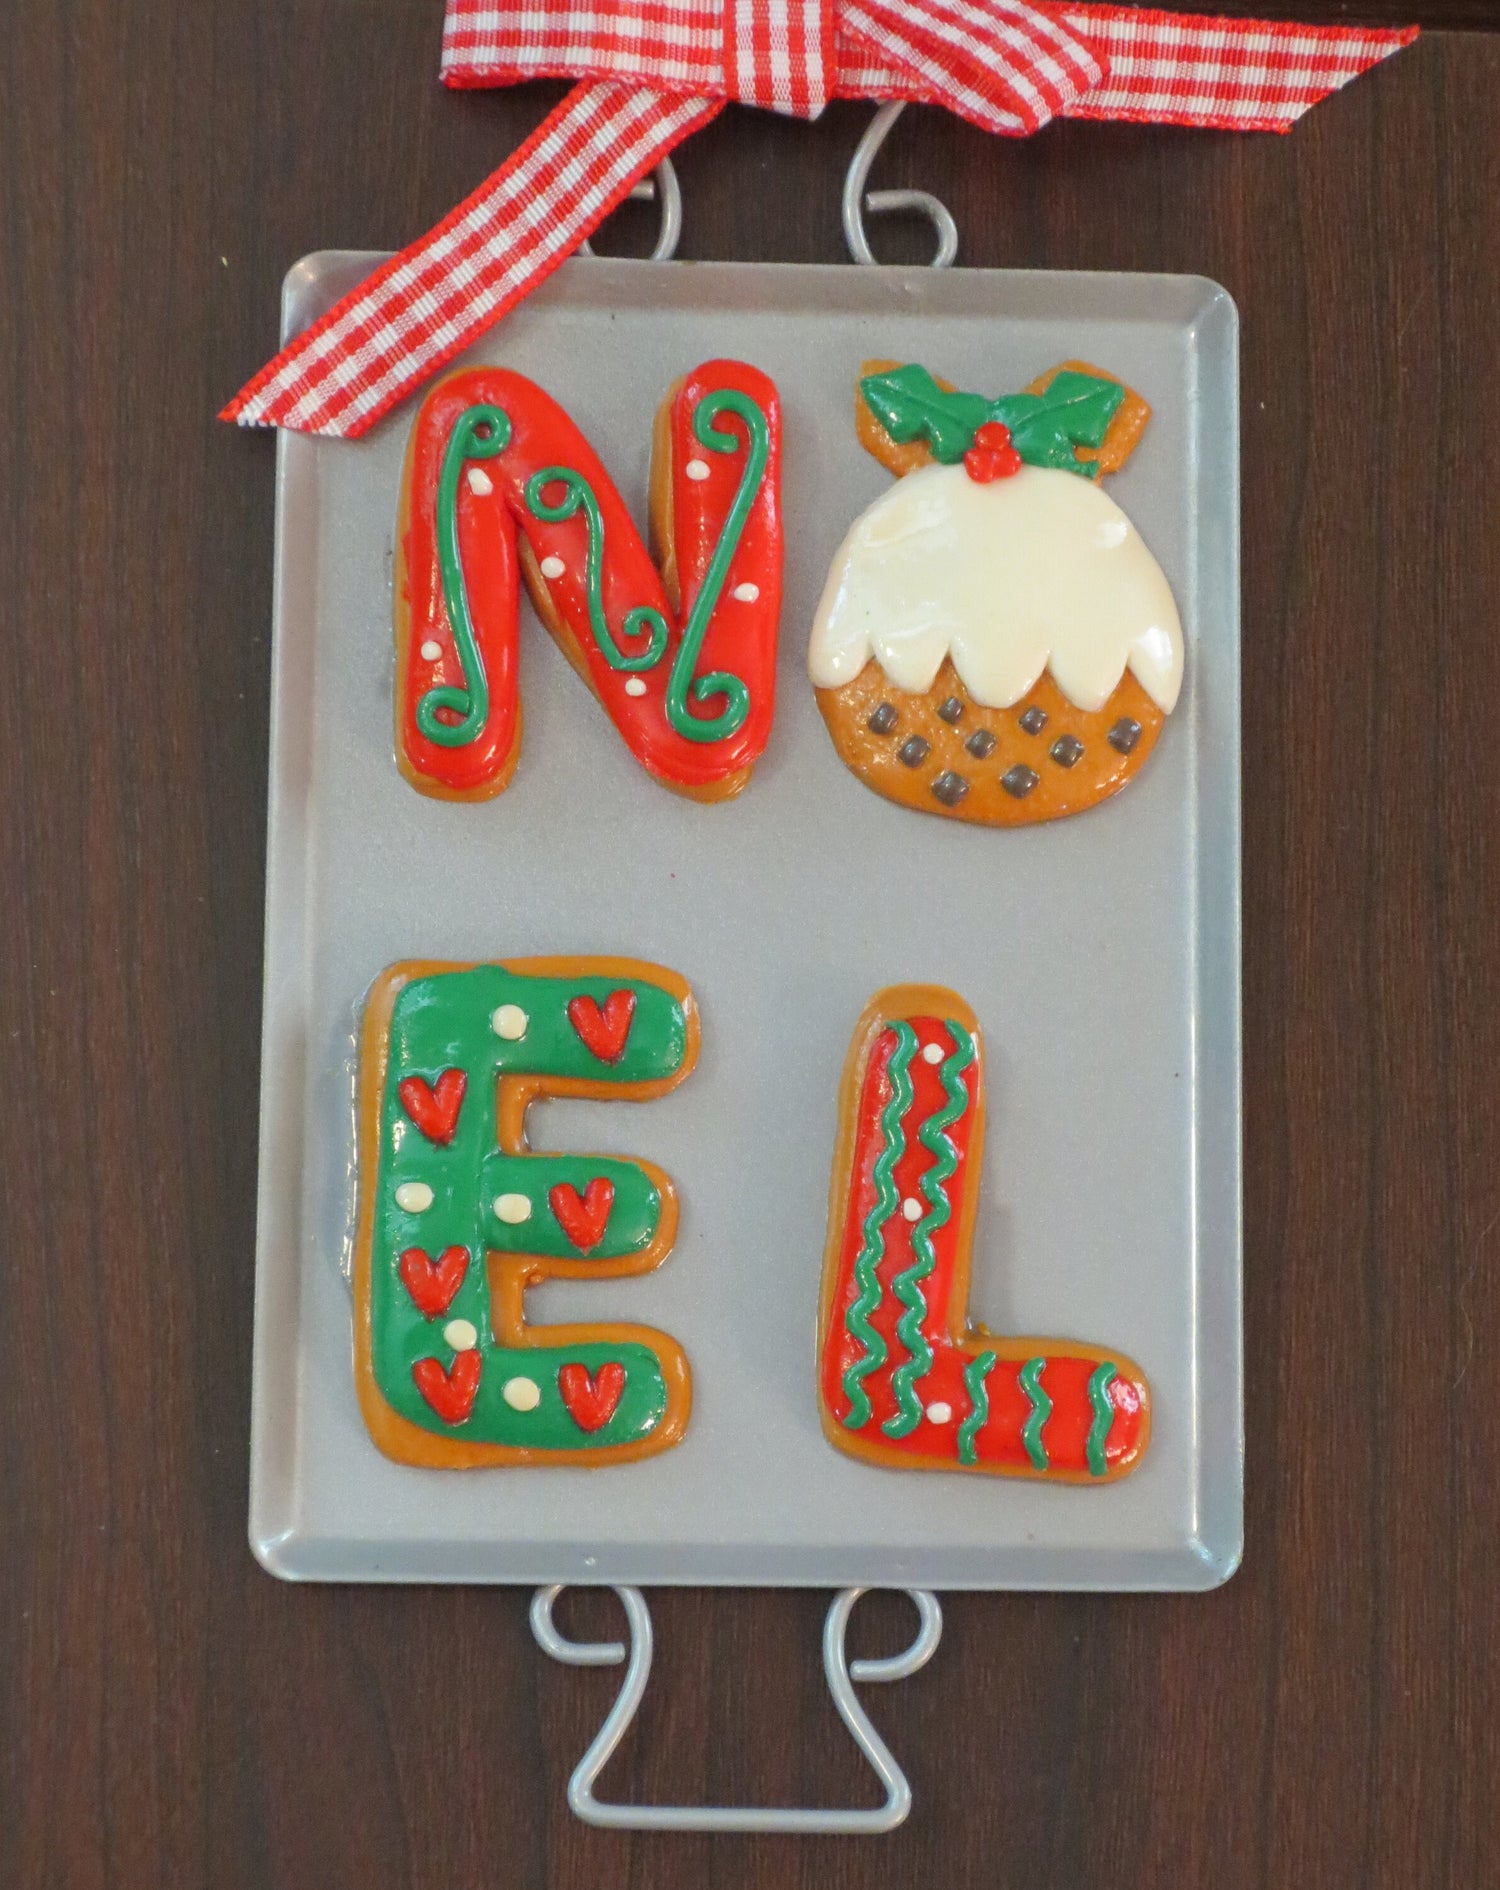 Gingerbread Cookie Bake Off Christmas Trophy Contest Decorating Winner Cookie Baking Sheet Gingerbread House Christmas Decor Ugly Sweater